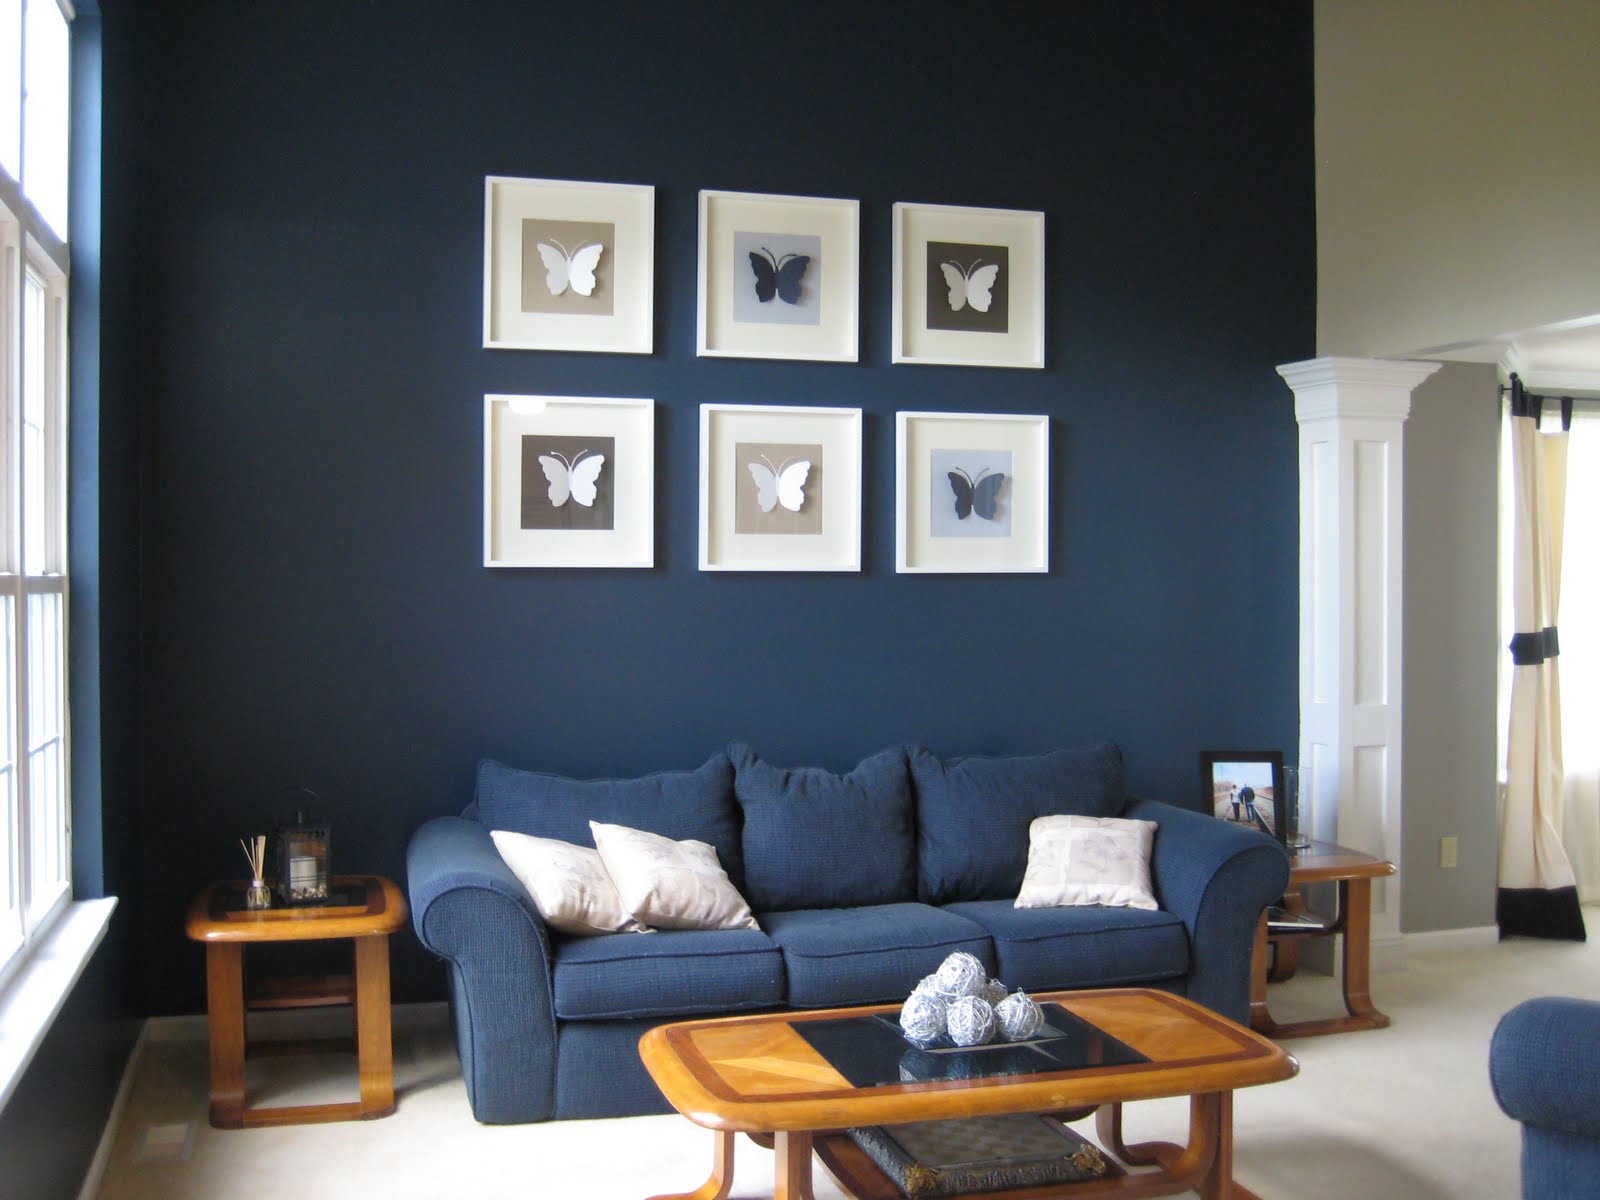 Selection Of Best Home Paint Colors (Helpful guide)